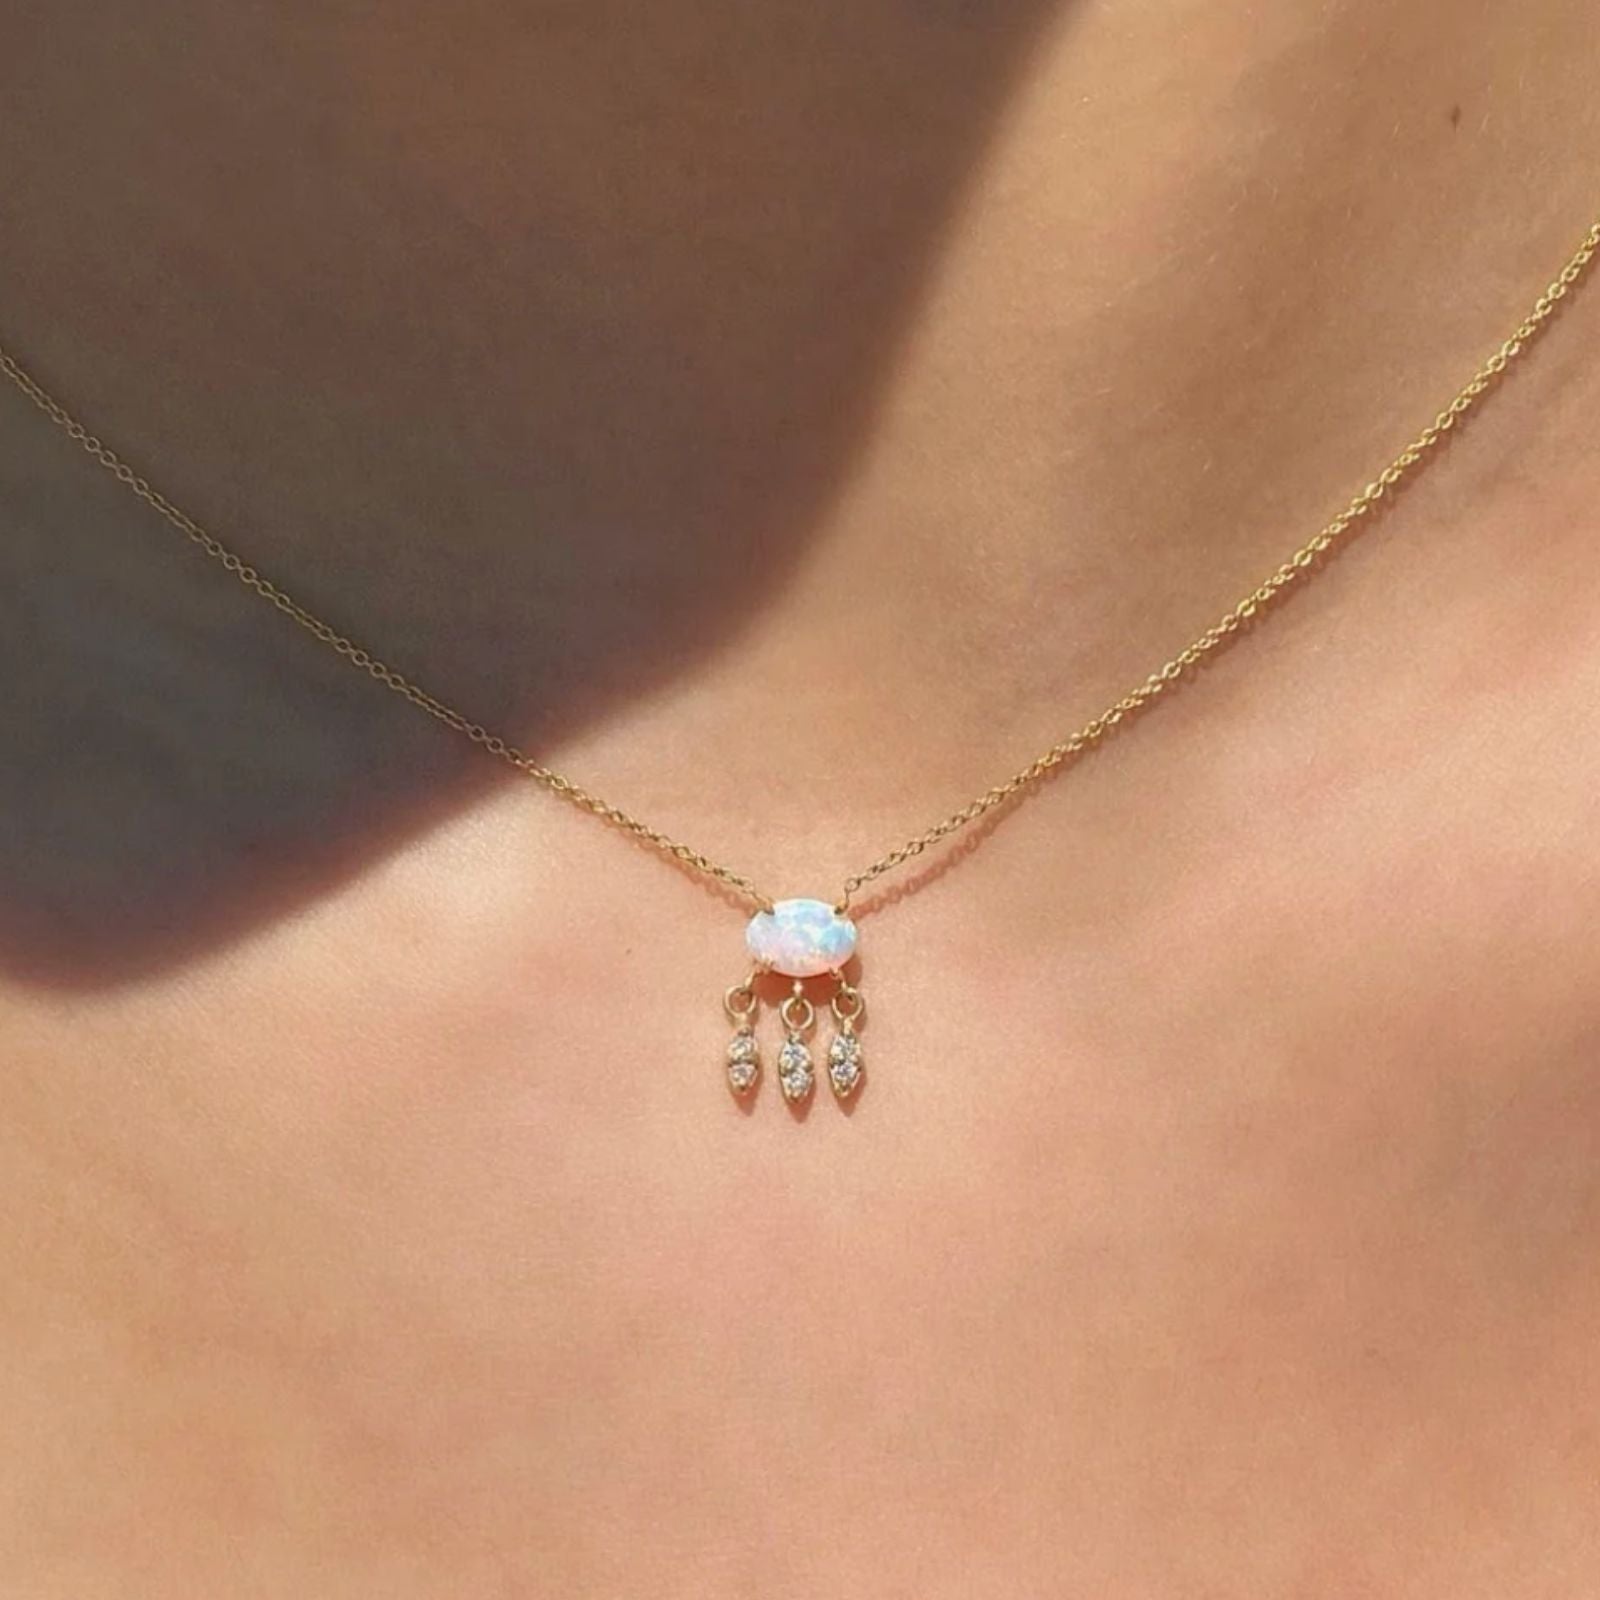 Oval opal necklace with three marquise diamond charms on model neck | Camille Jewelry